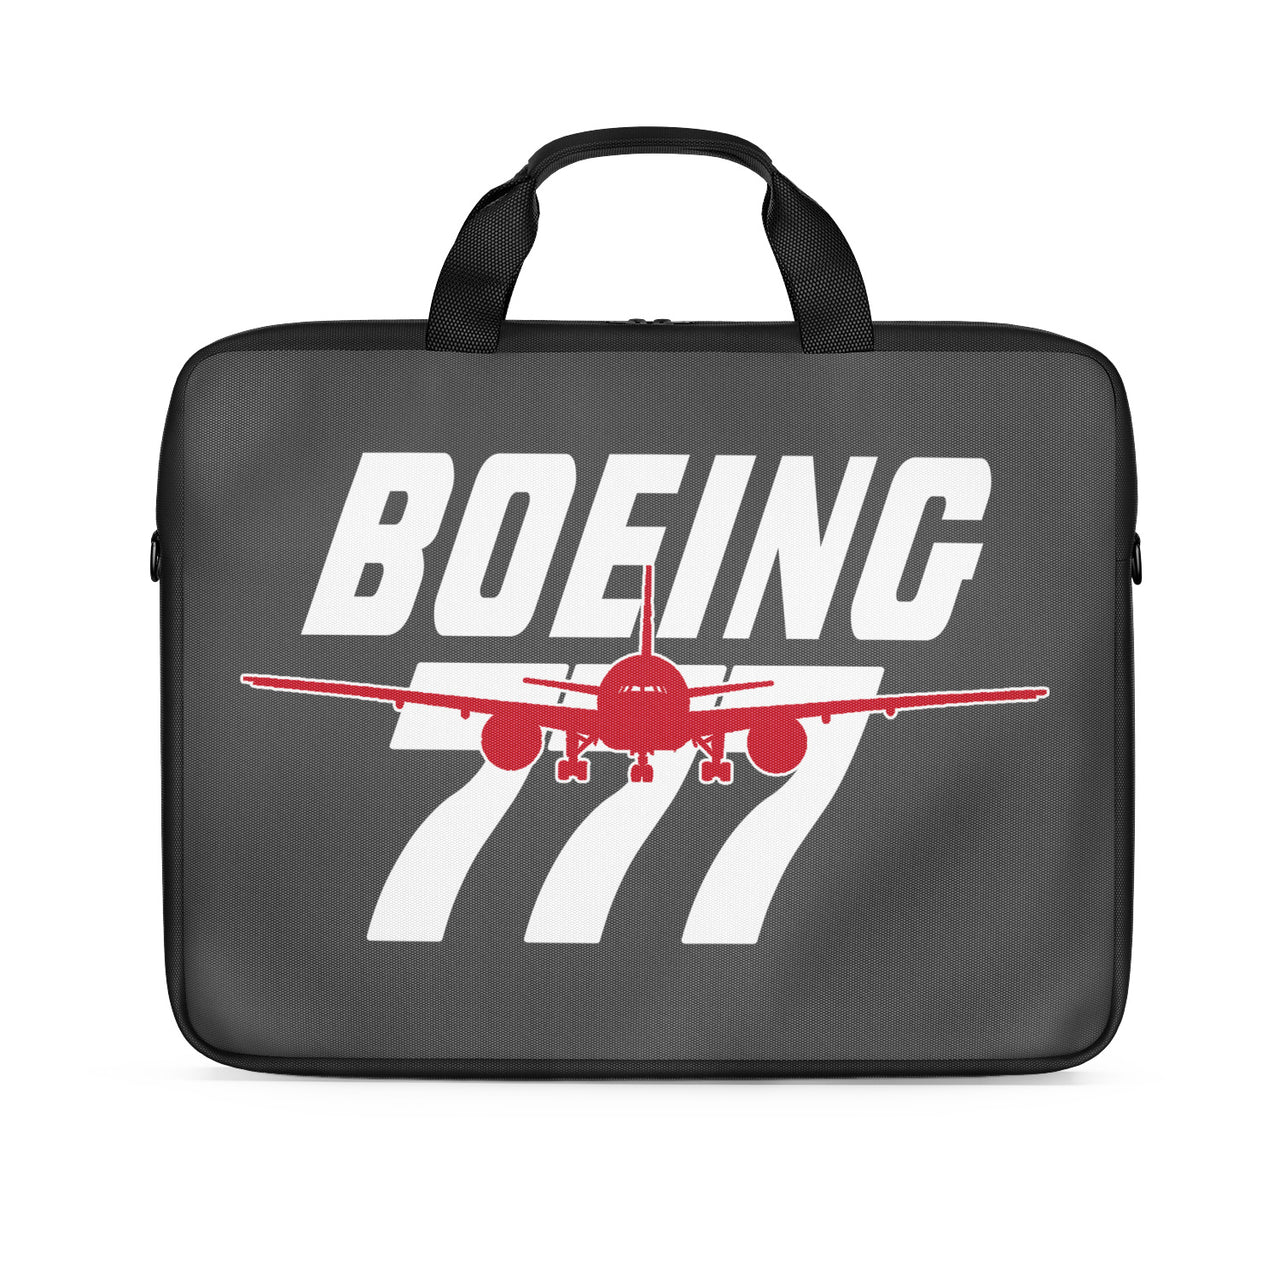 Amazing Boeing 777 Designed Laptop & Tablet Bags